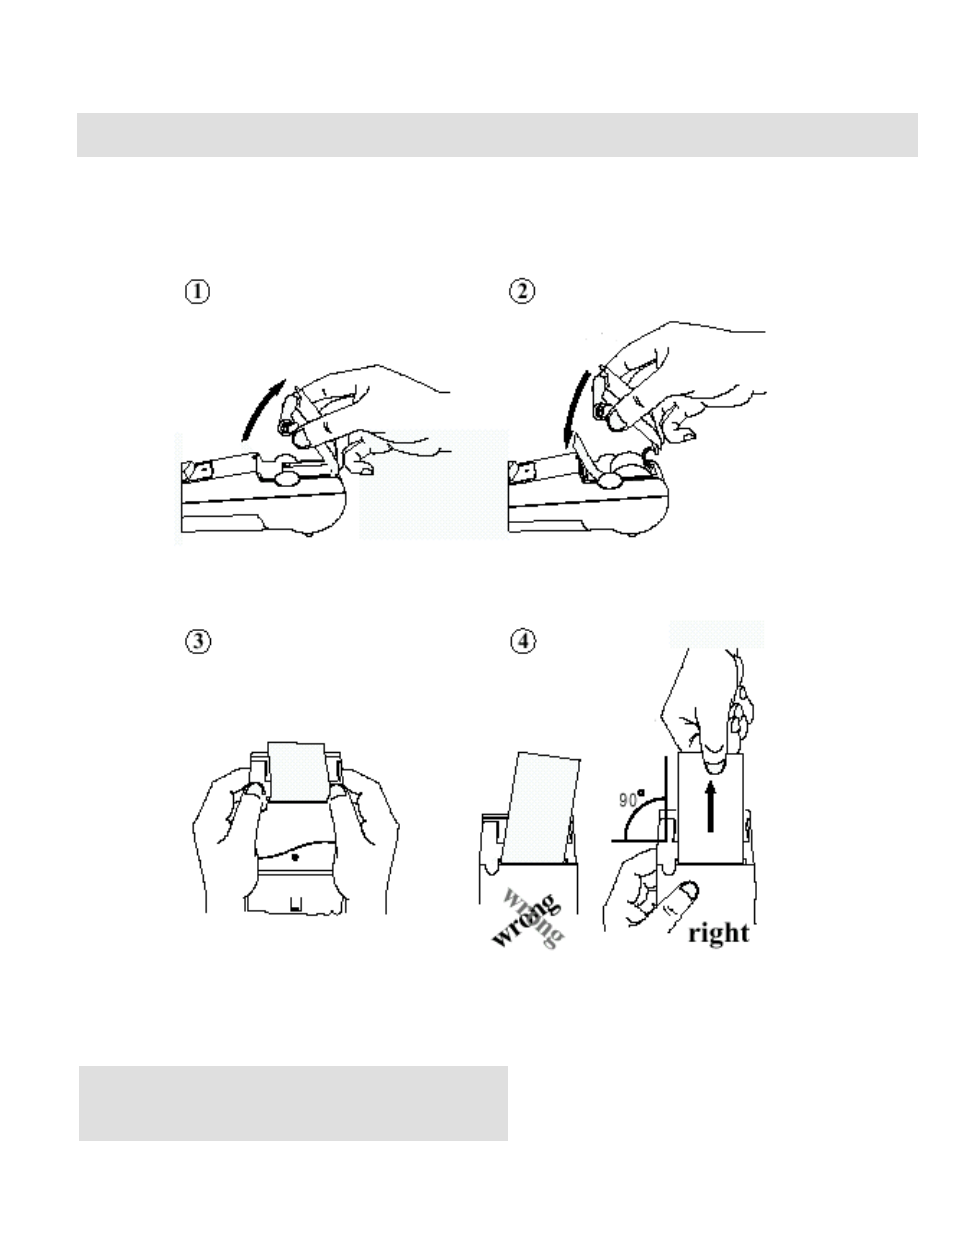 Loading paper | Infinite Peripherals PP-55 User Manual | Page 9 / 26